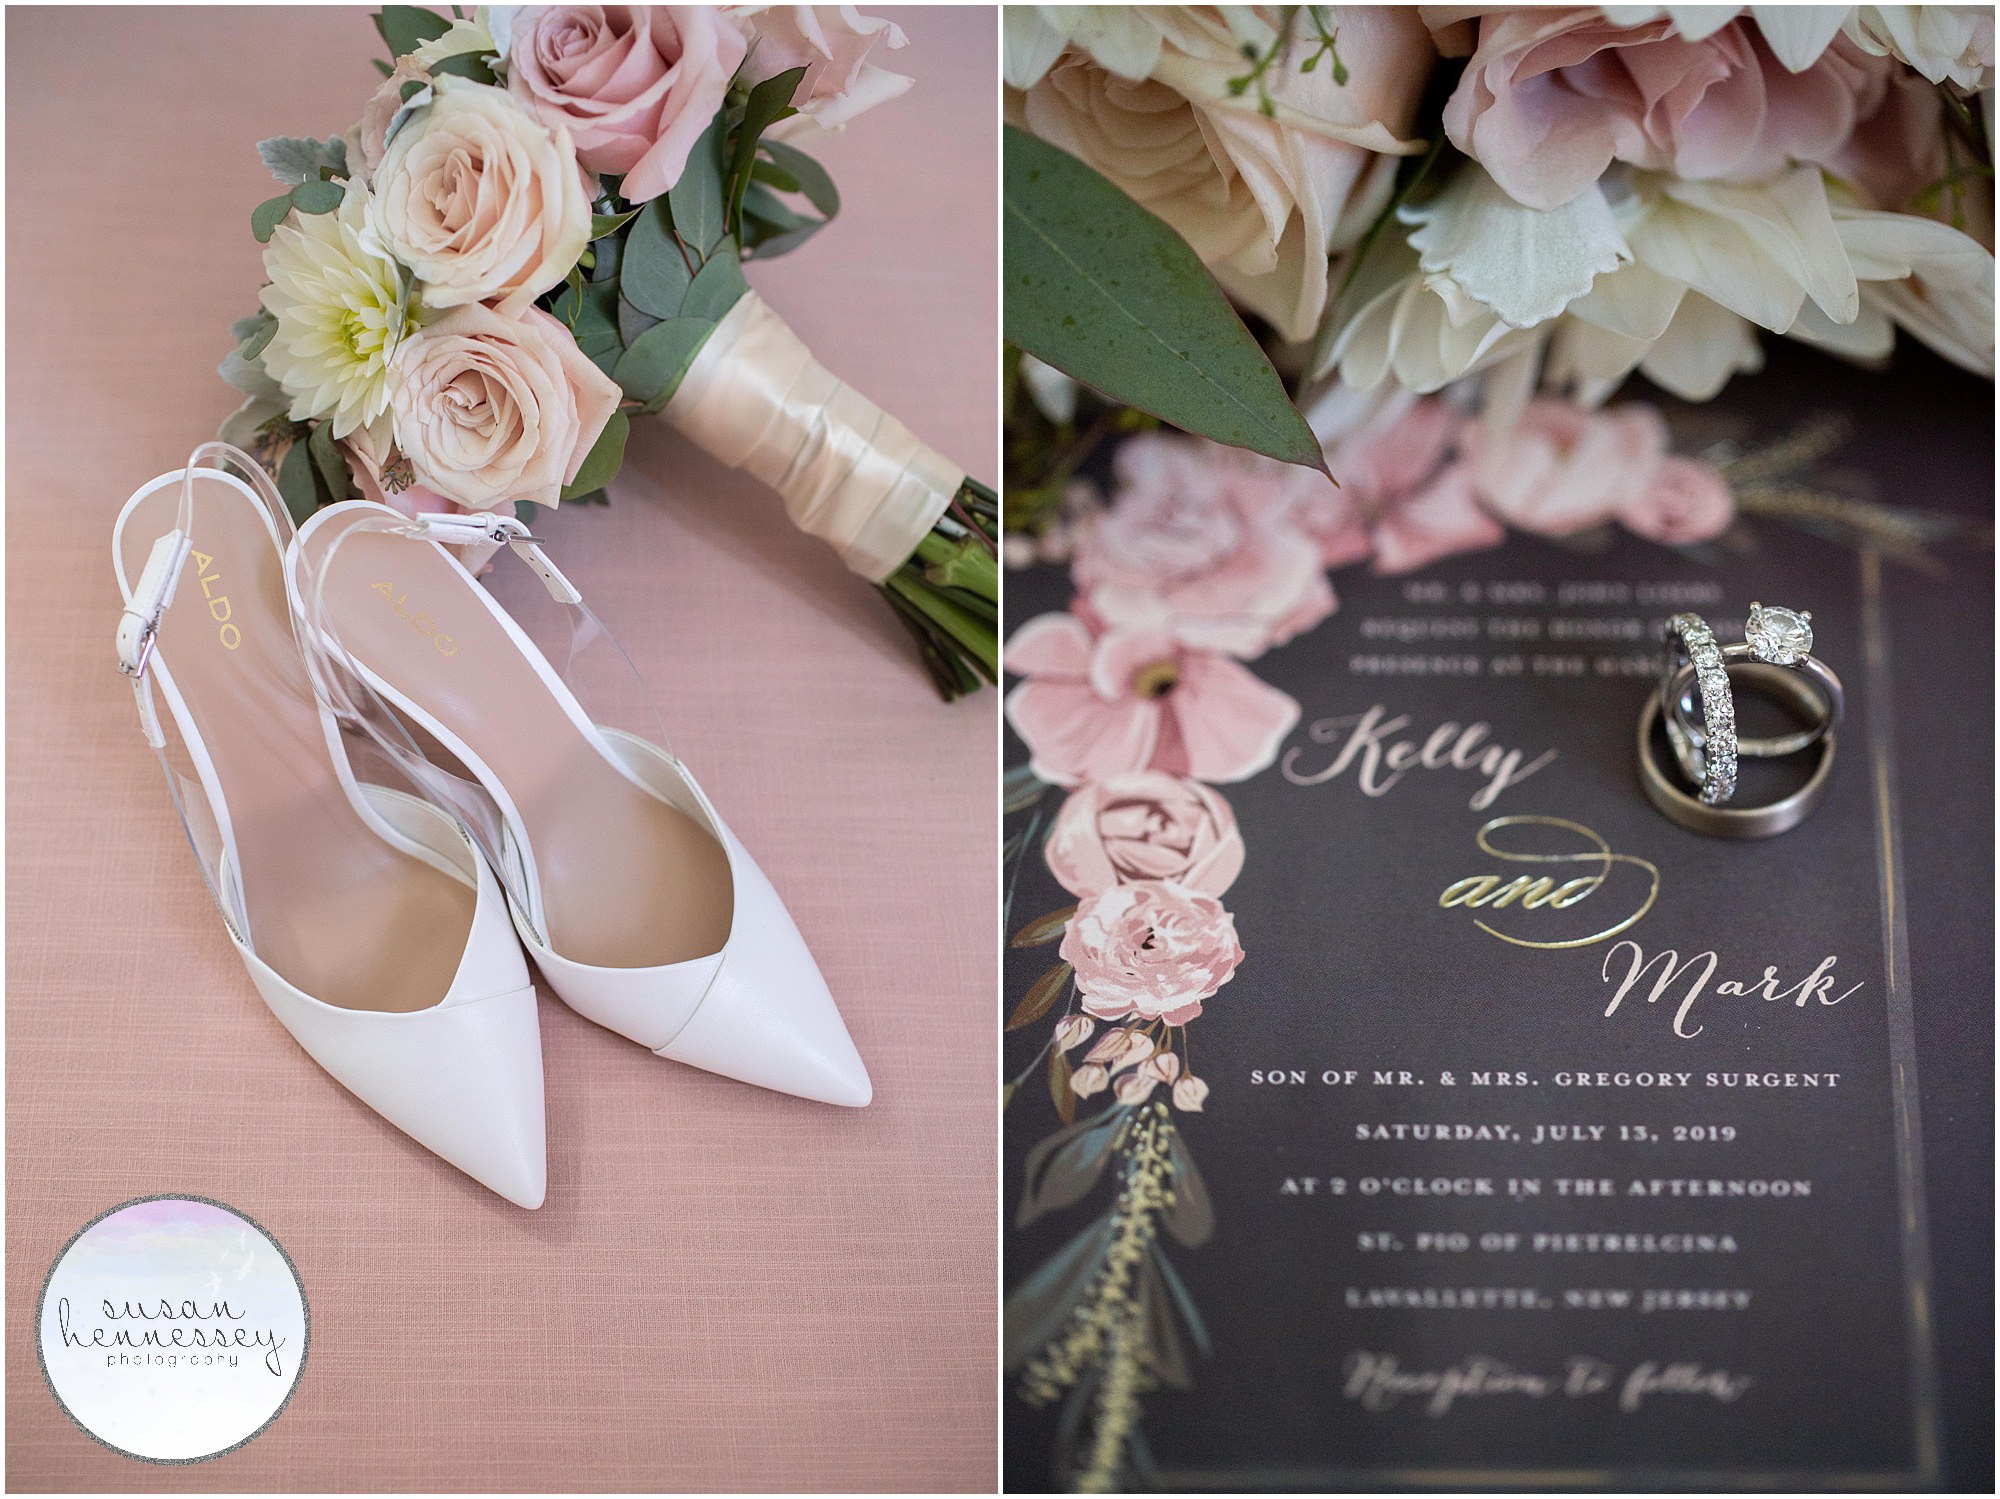 Bride's shoes, bouquet, invitation, wedding bands and engagement ring